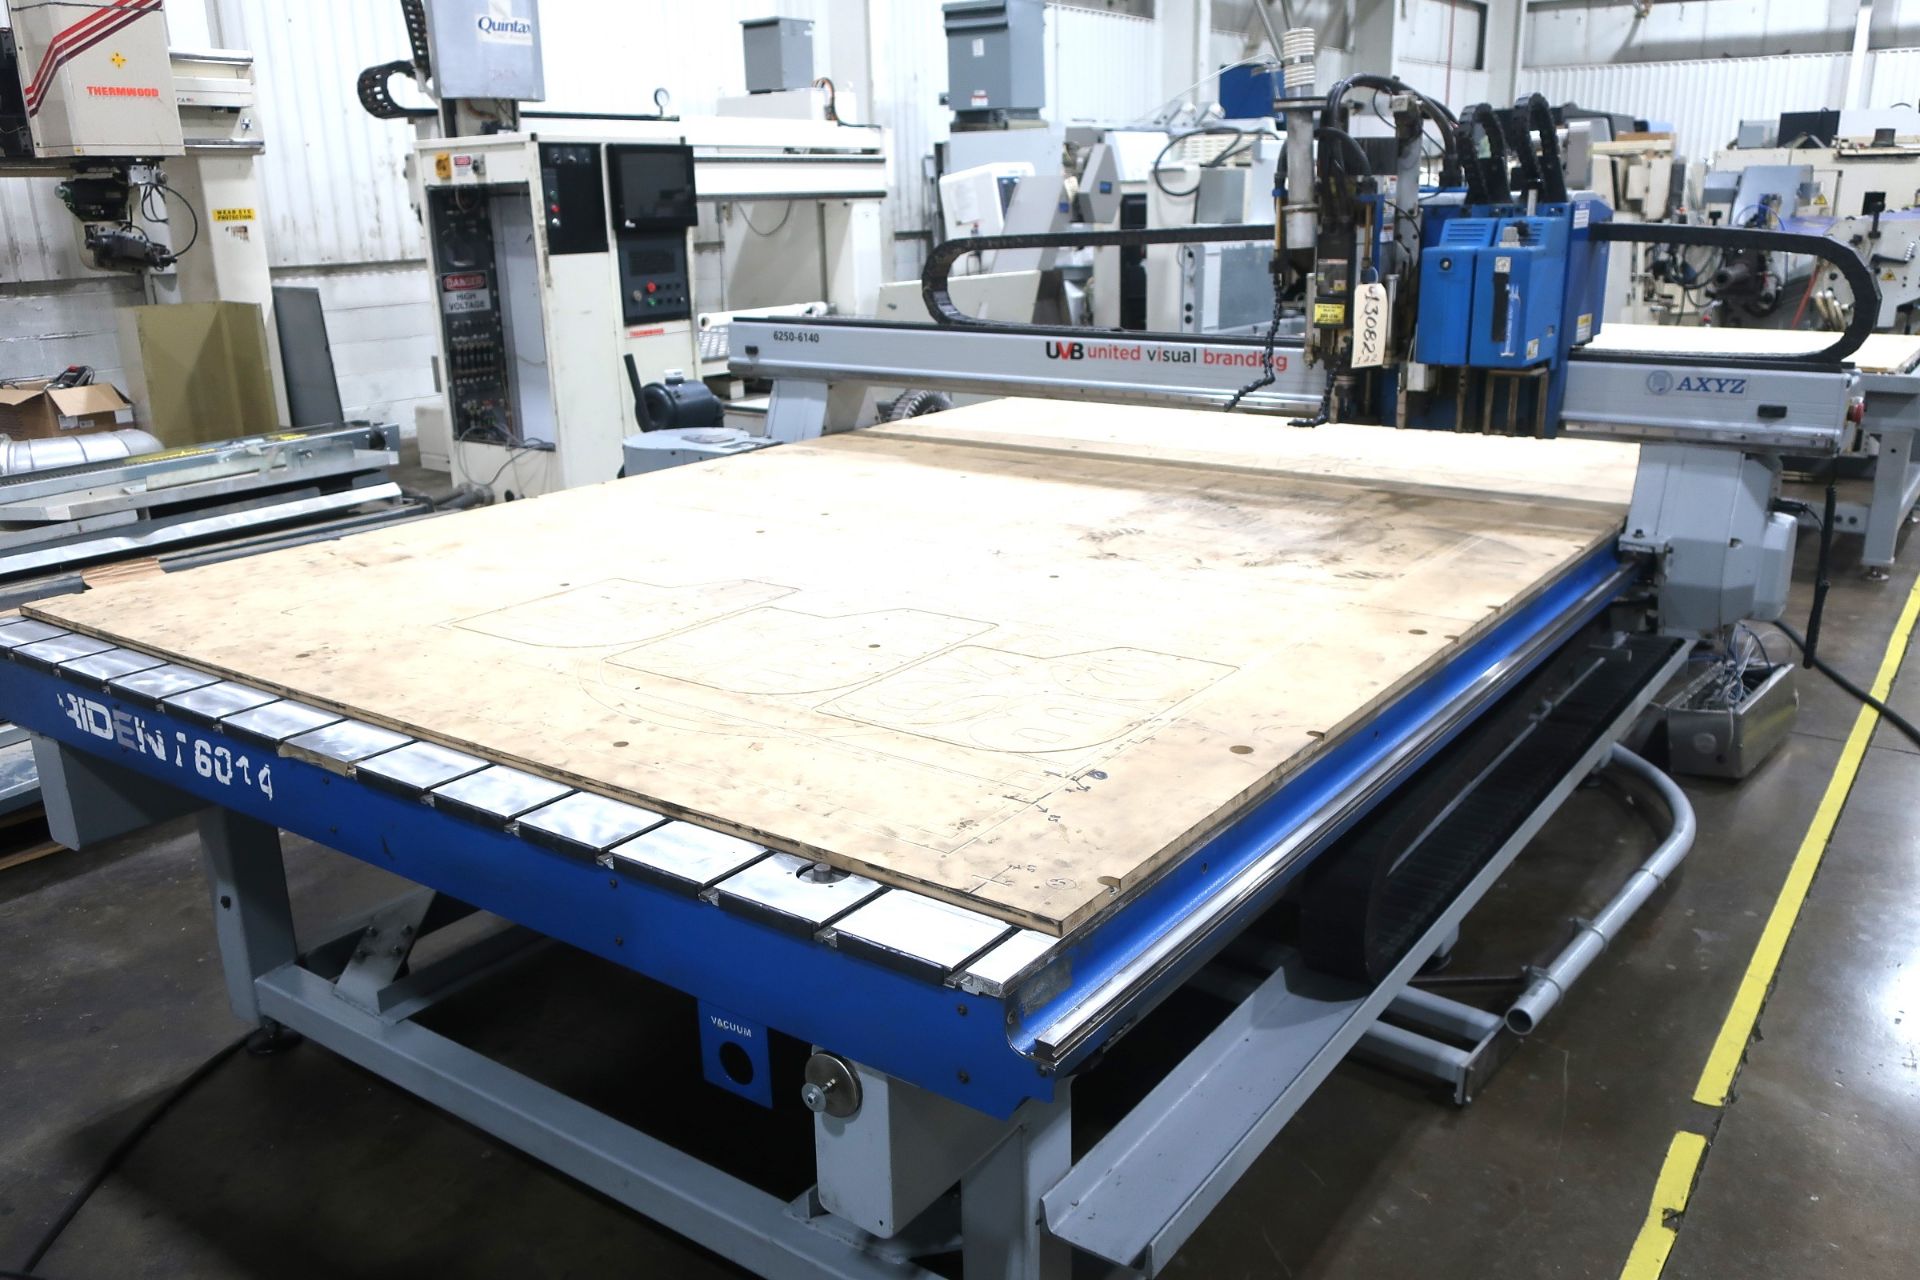 7'x14' AXYZ TRIDENT 6014 ATC CNC ROUTER AND KNIFE CUTTING MACHINE, S/N 6250-6140, NEW 2017 - Image 2 of 19